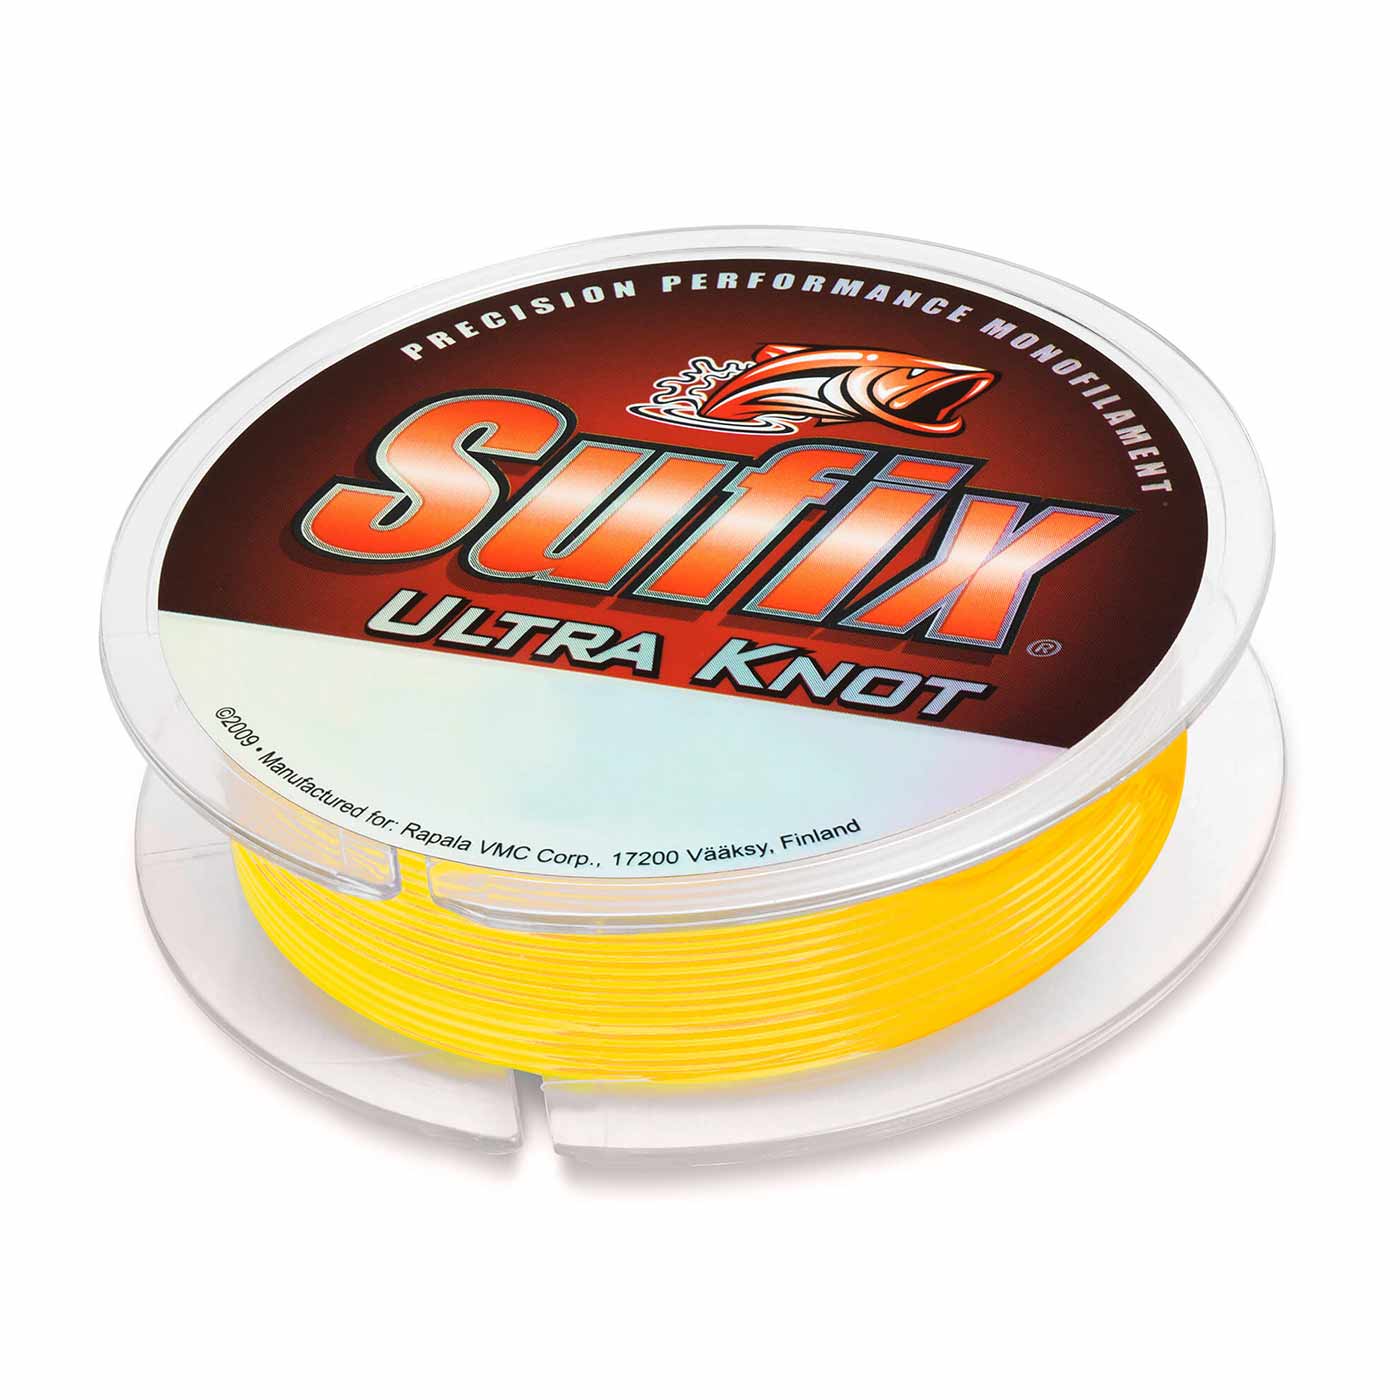 Sufix Ultra Knot Opaque Yellow 0,28mm 6,3kg 1360m